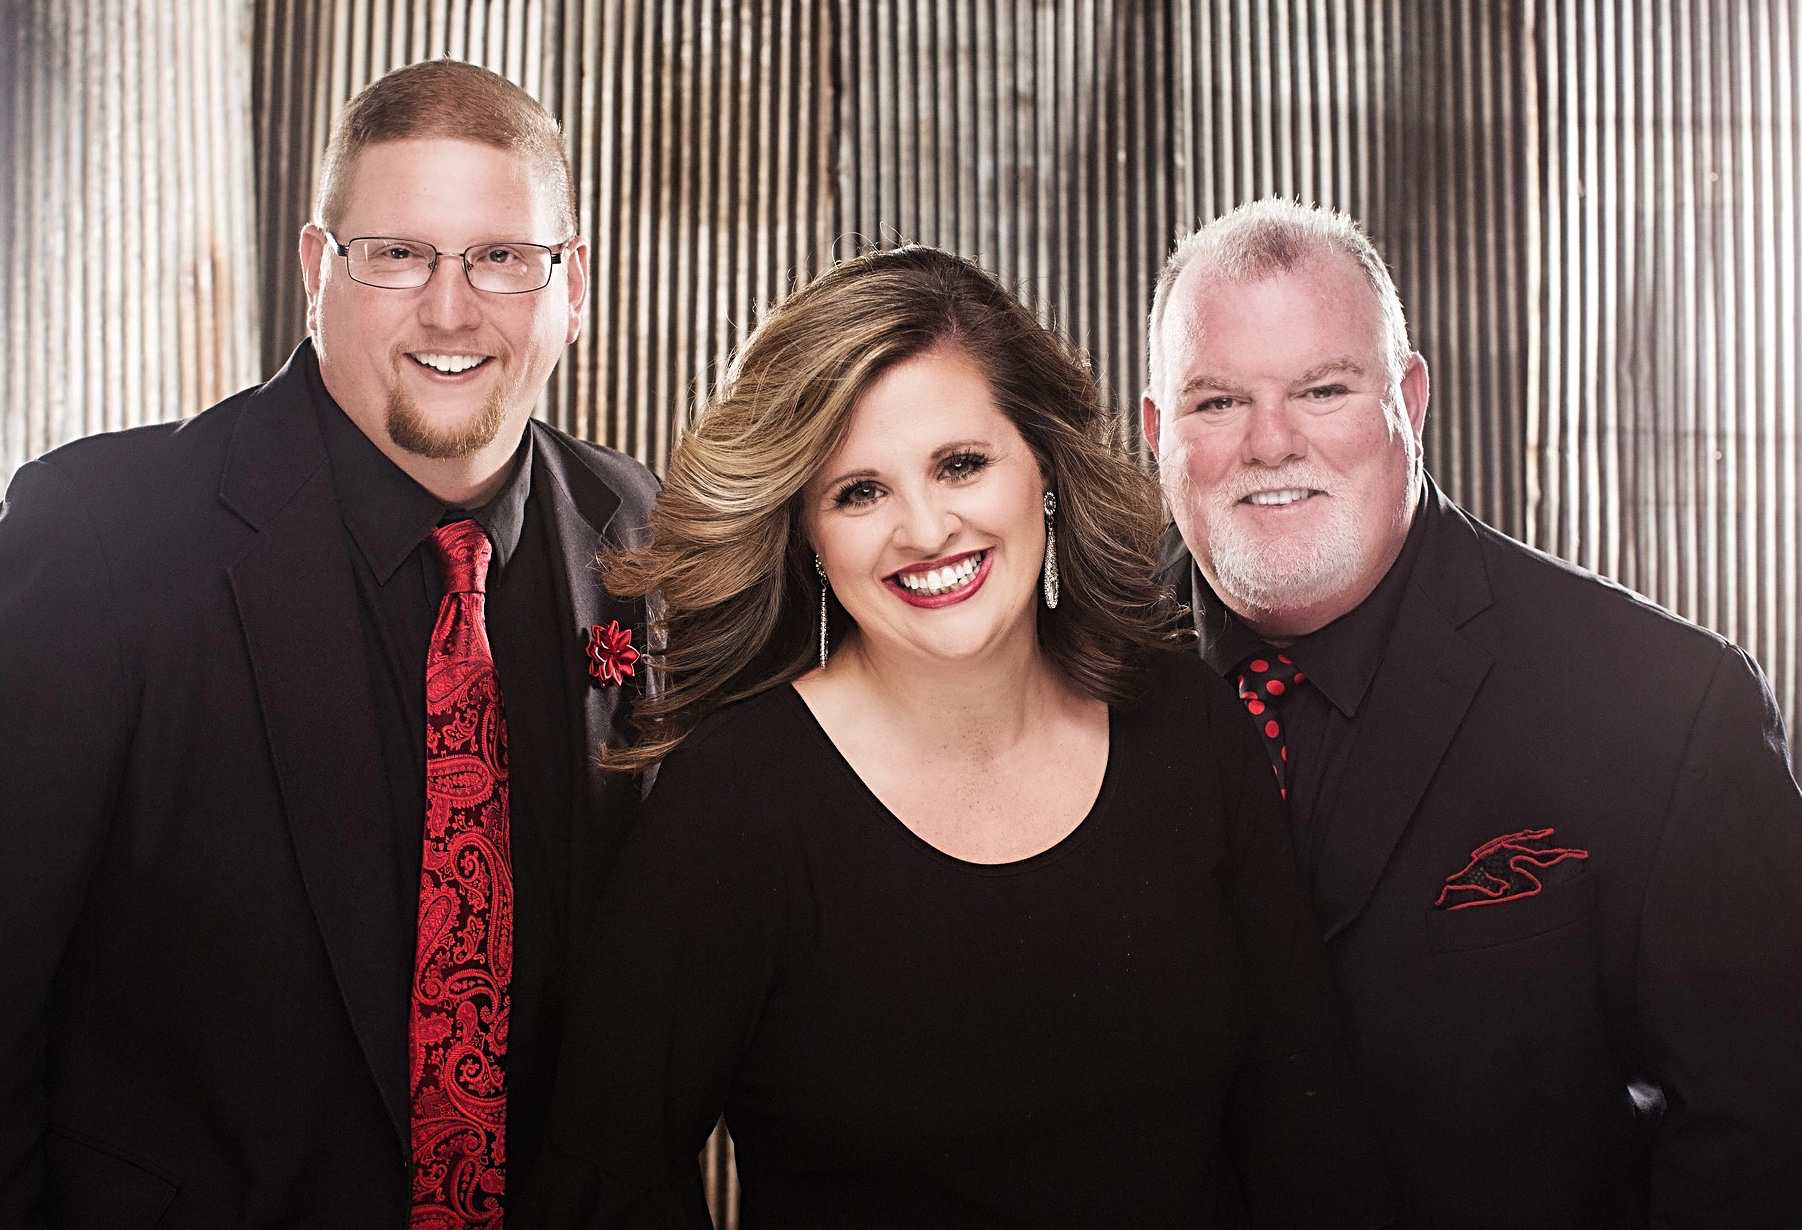 CHAPEL VALLEY SIGNS RECORDING CONTRACT WITH SURRENDERED OF GADSDEN, ALABAMA